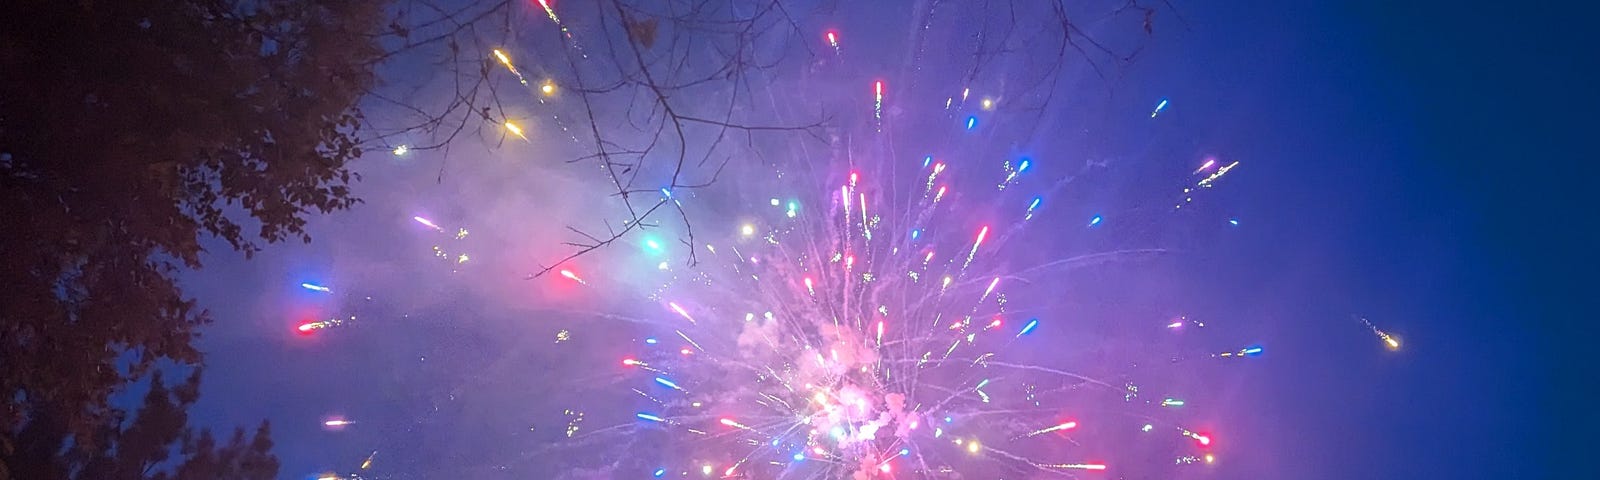 A fireworks display in the sky.